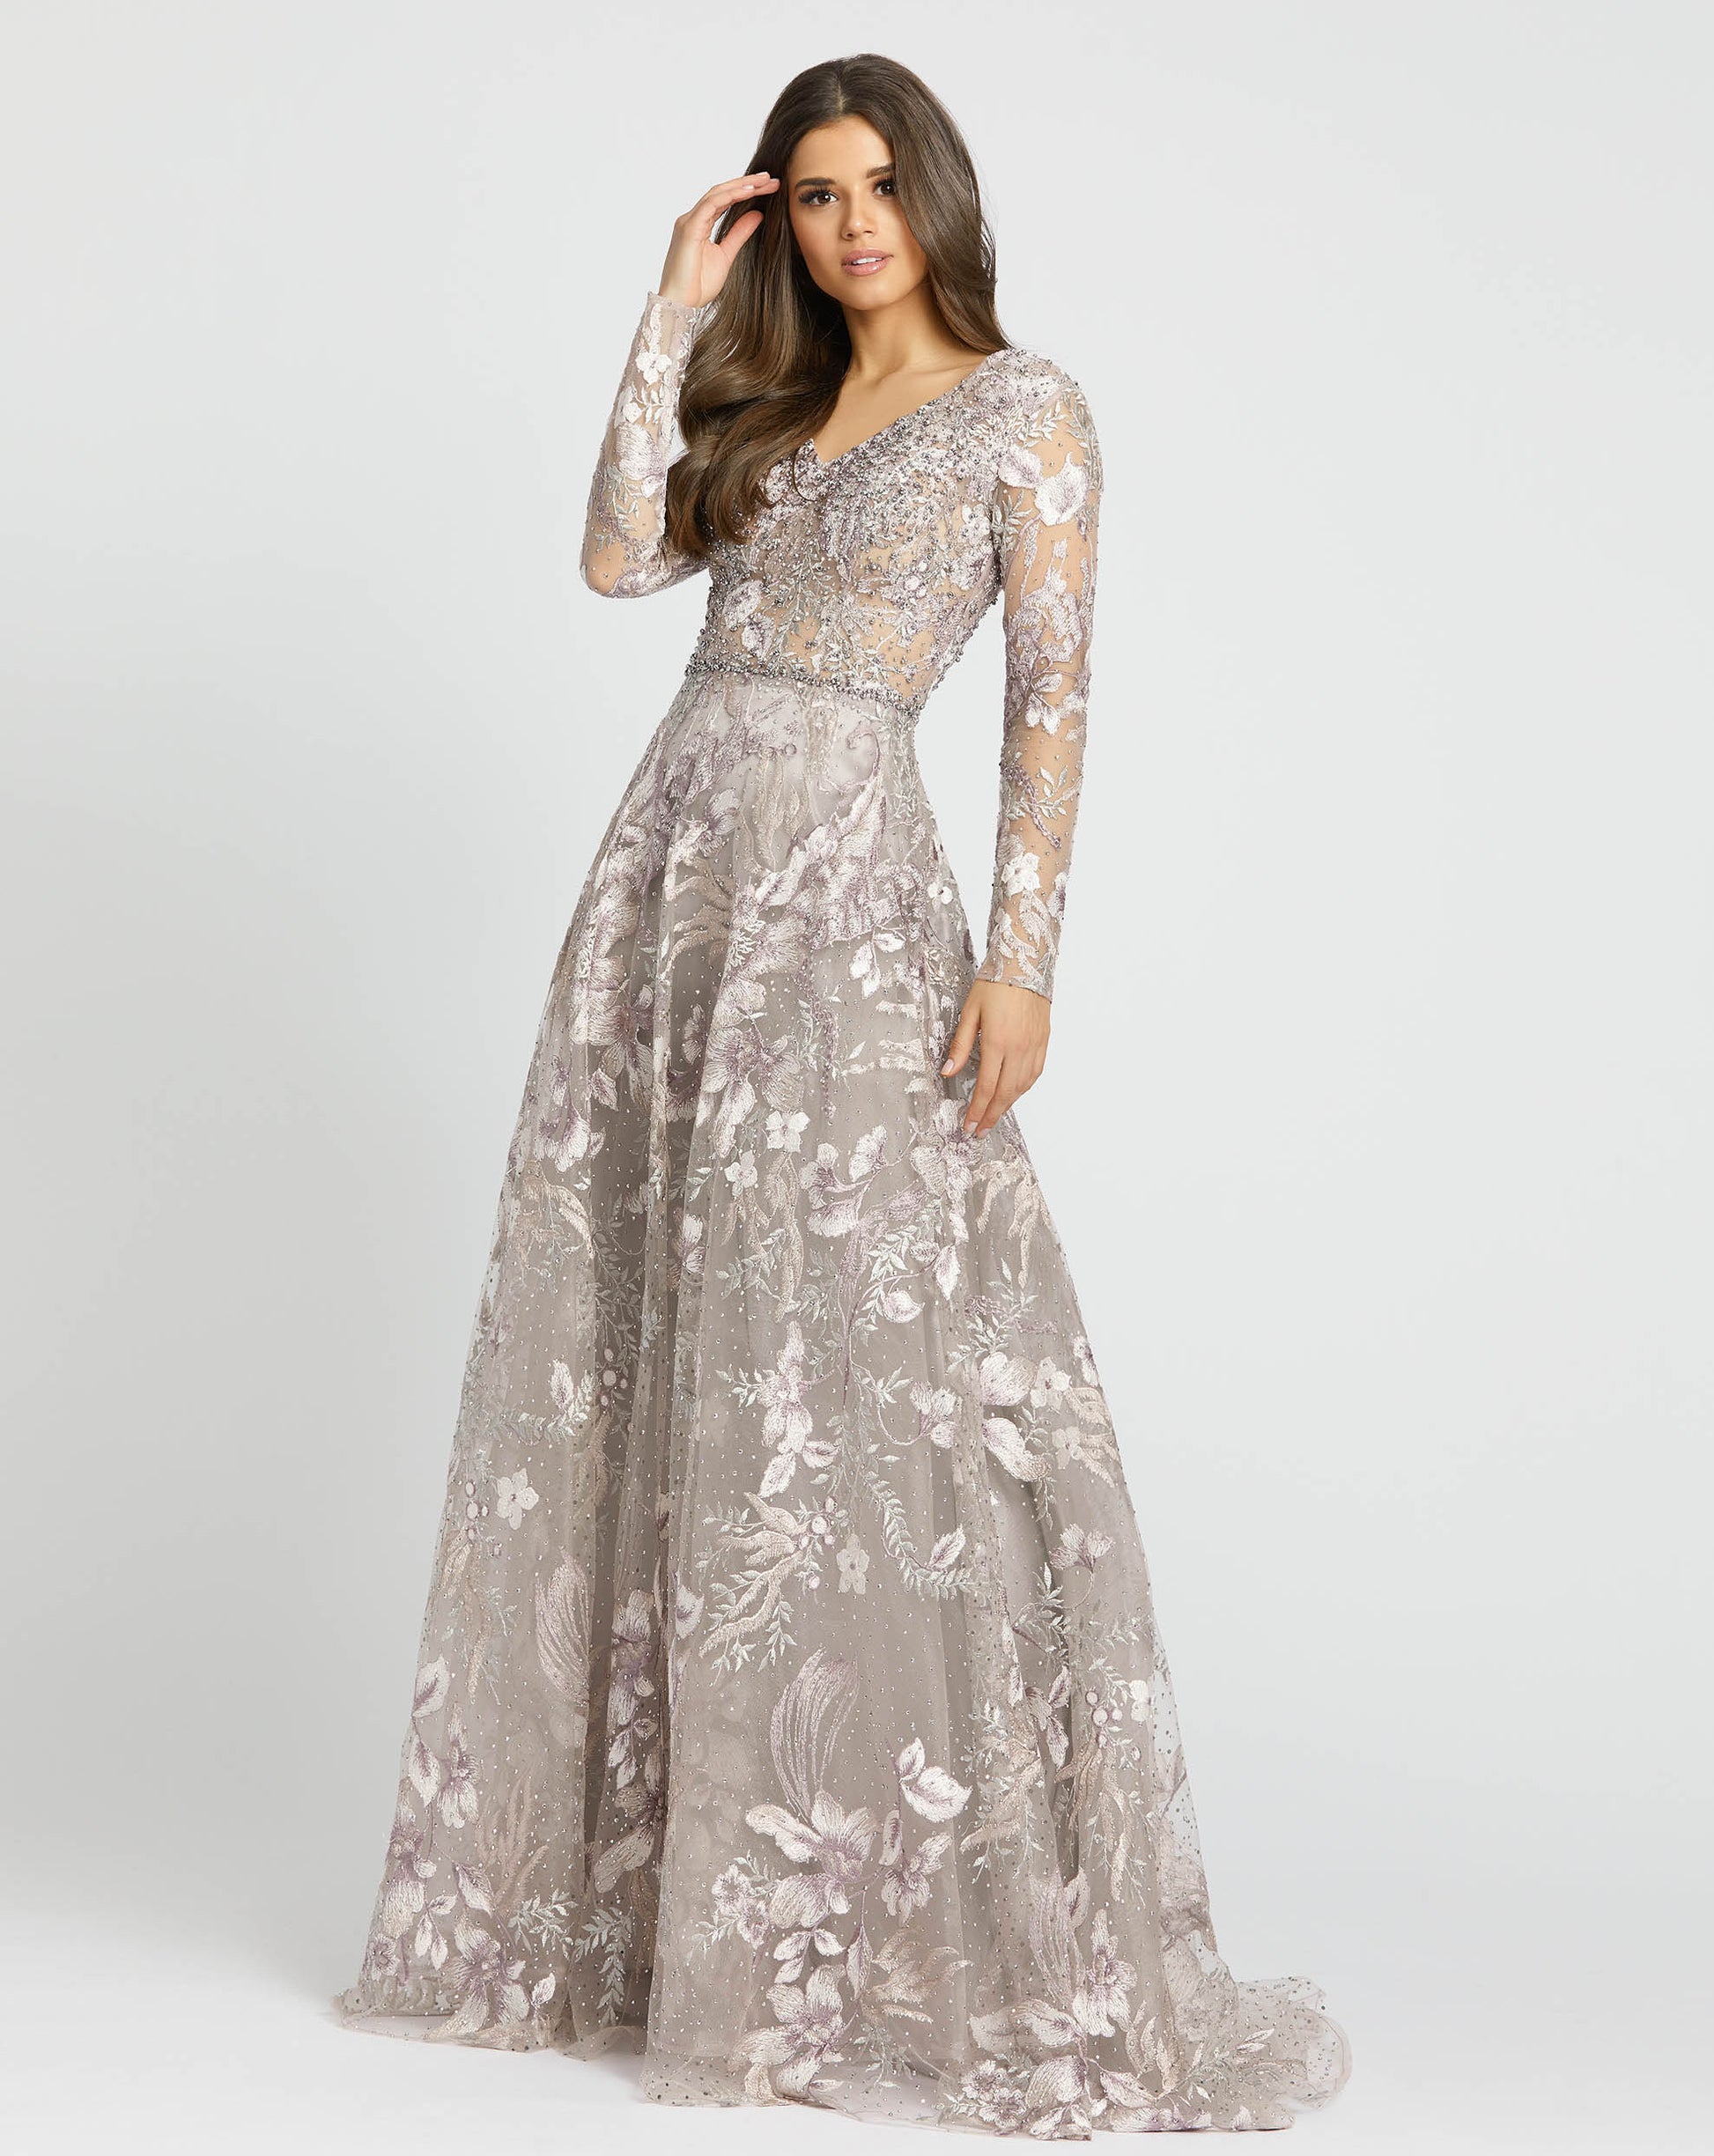 The bolder, the better. This jaw-dropping gown proves there’s no such thing as too ornate, flaunting an incredible design filled with botanical embroidery and dreamy crystal sparkle. The gown is styled with a V-neckline, sheer, embellished long sleeves an